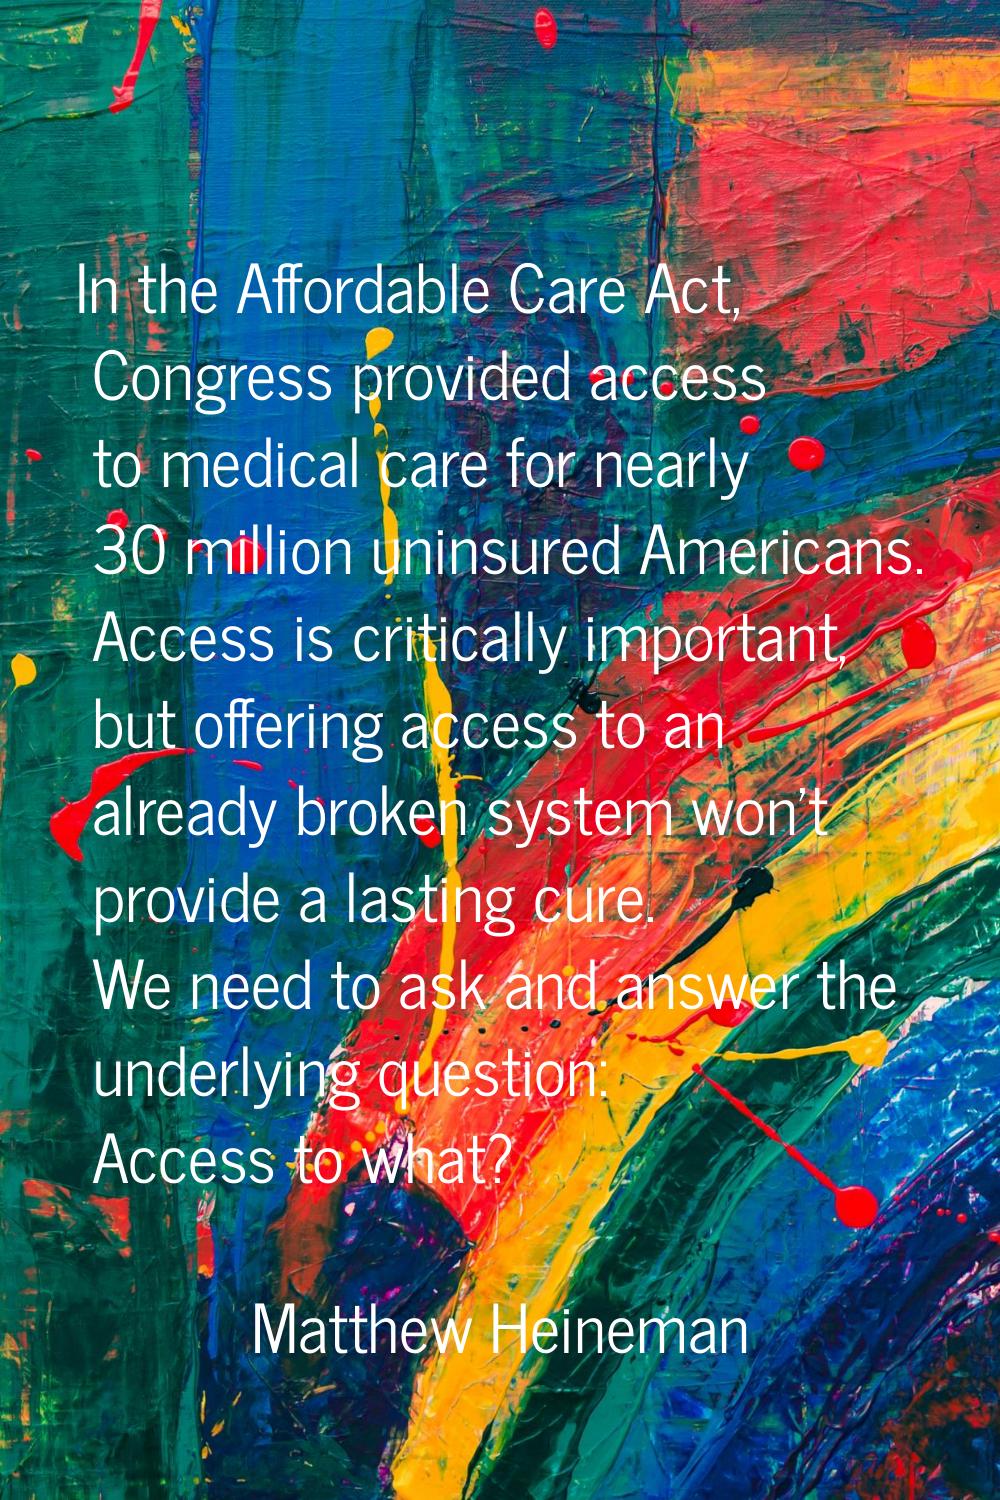 In the Affordable Care Act, Congress provided access to medical care for nearly 30 million uninsure